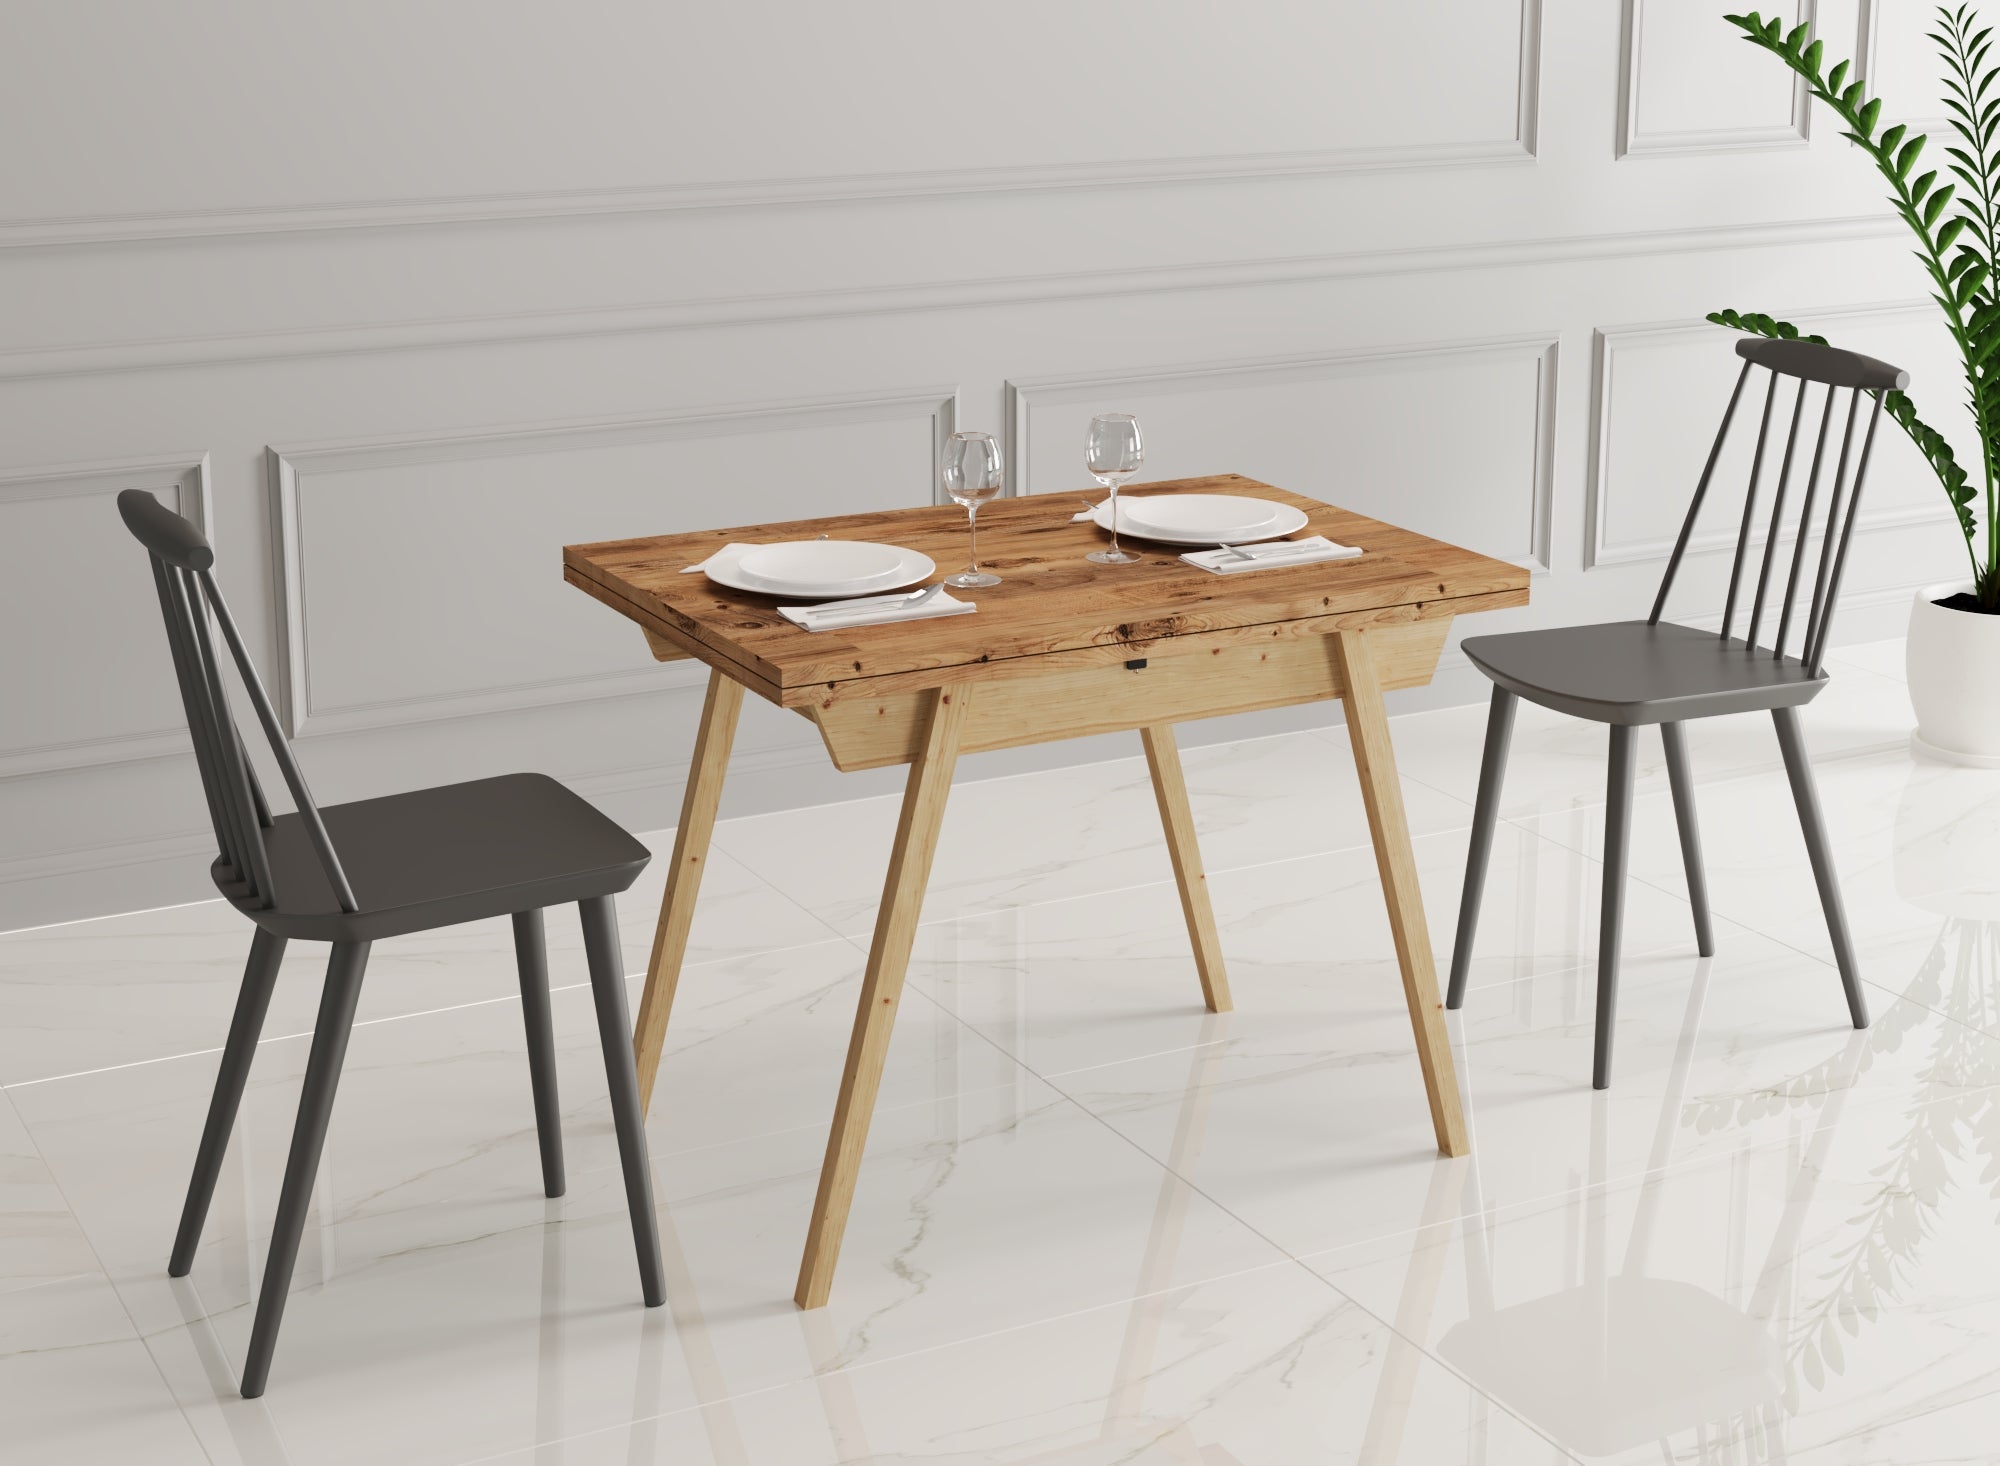 Ottara Rustic Extendable Dining Table with Storage